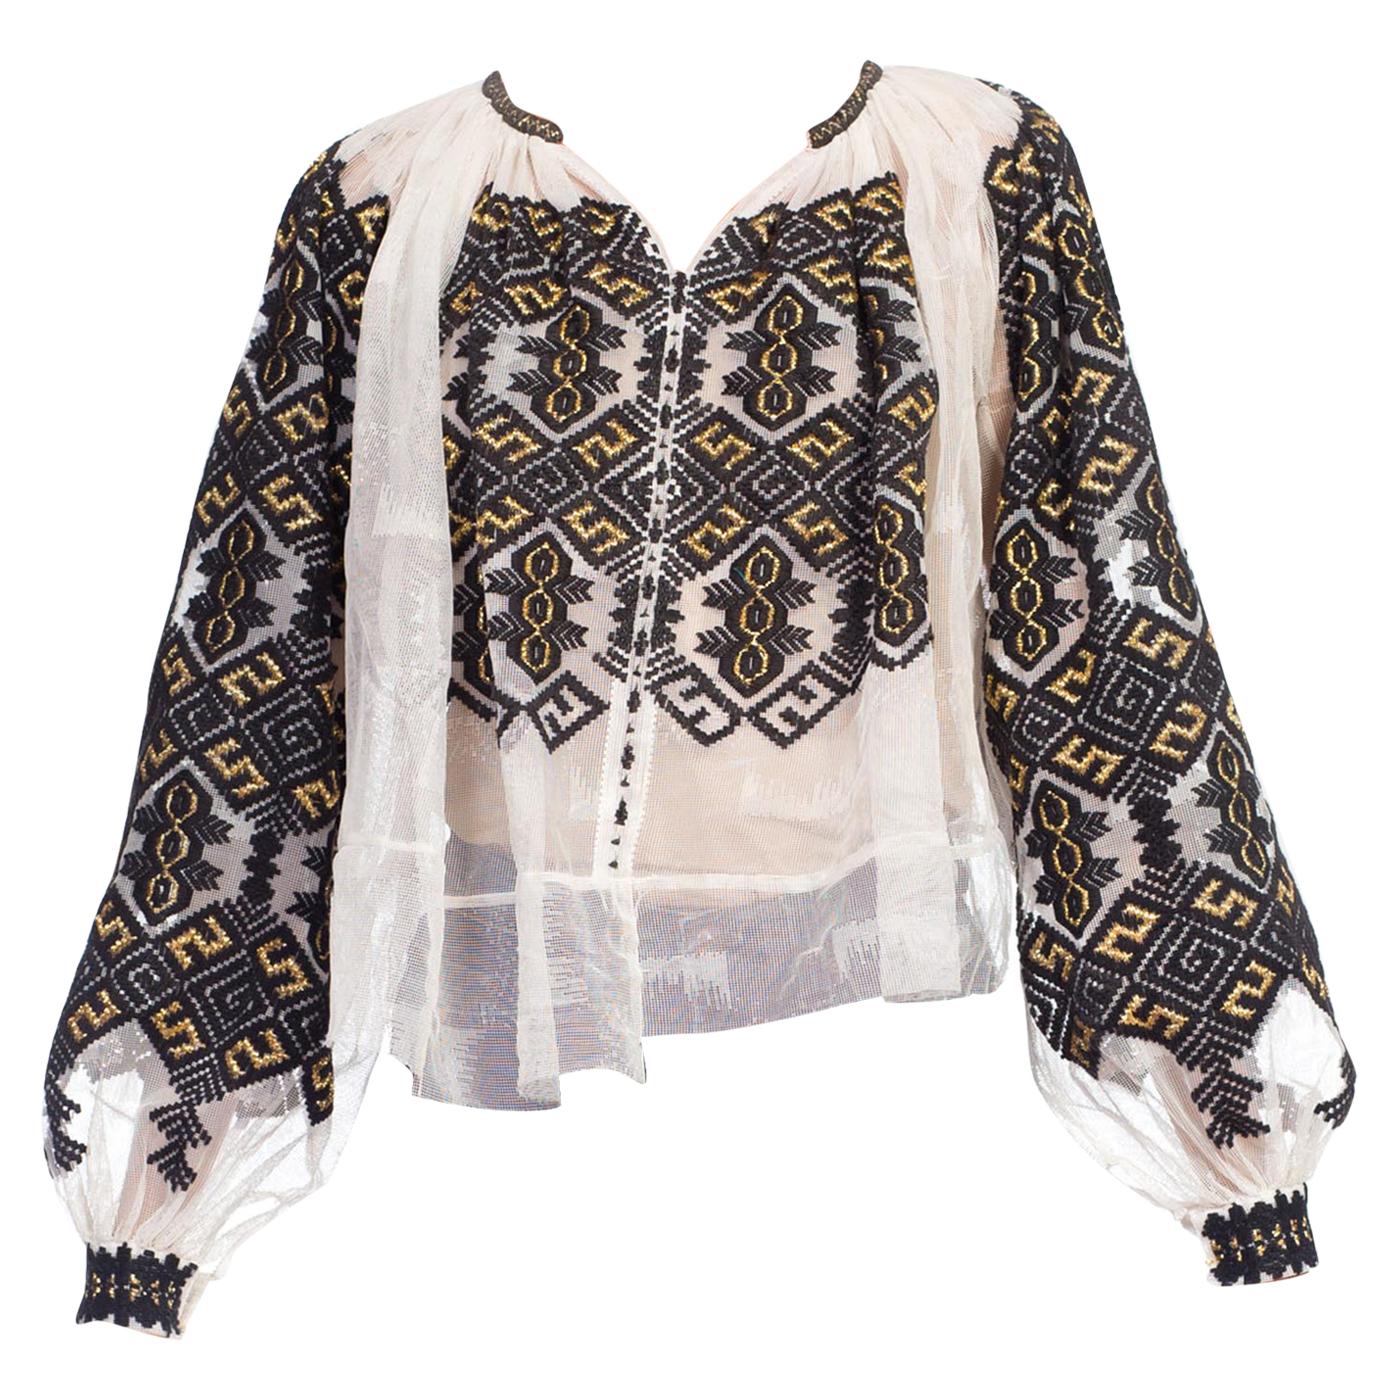 Boho Romanian Hand Embroidered Net Blouse With Gold Details